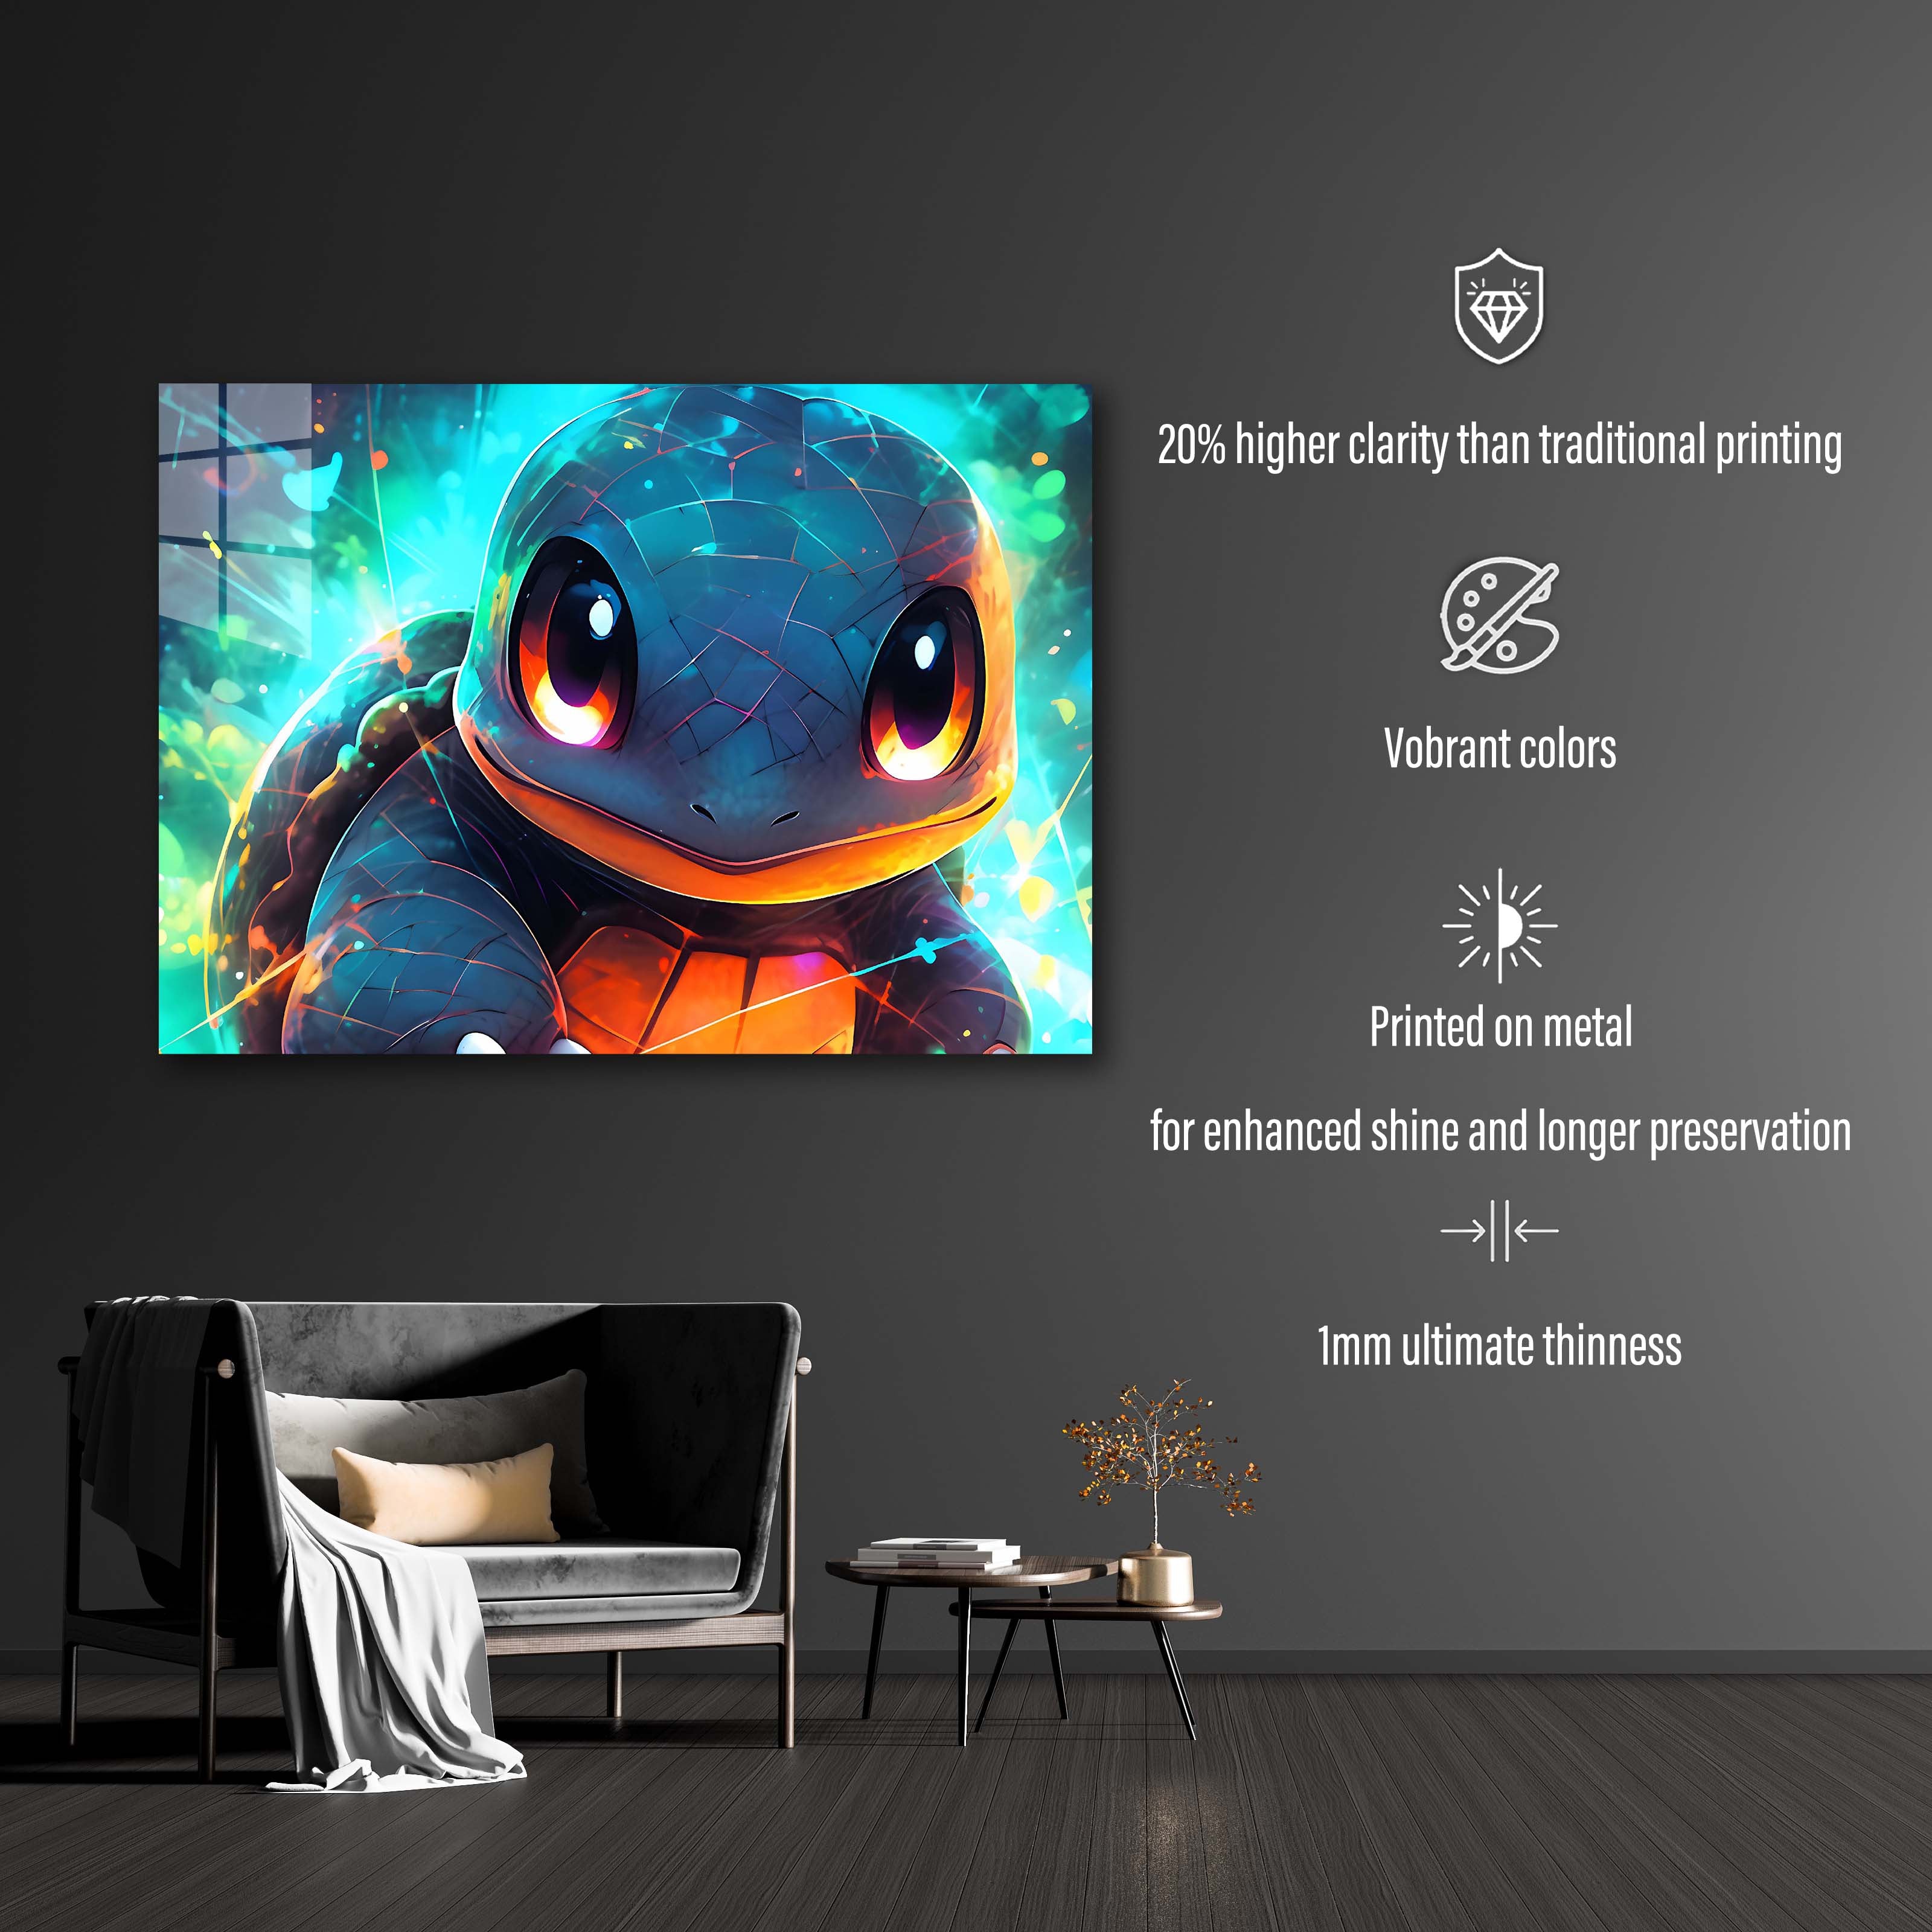 Squirtle horizontal attraction-designed by @Vid_M@tion